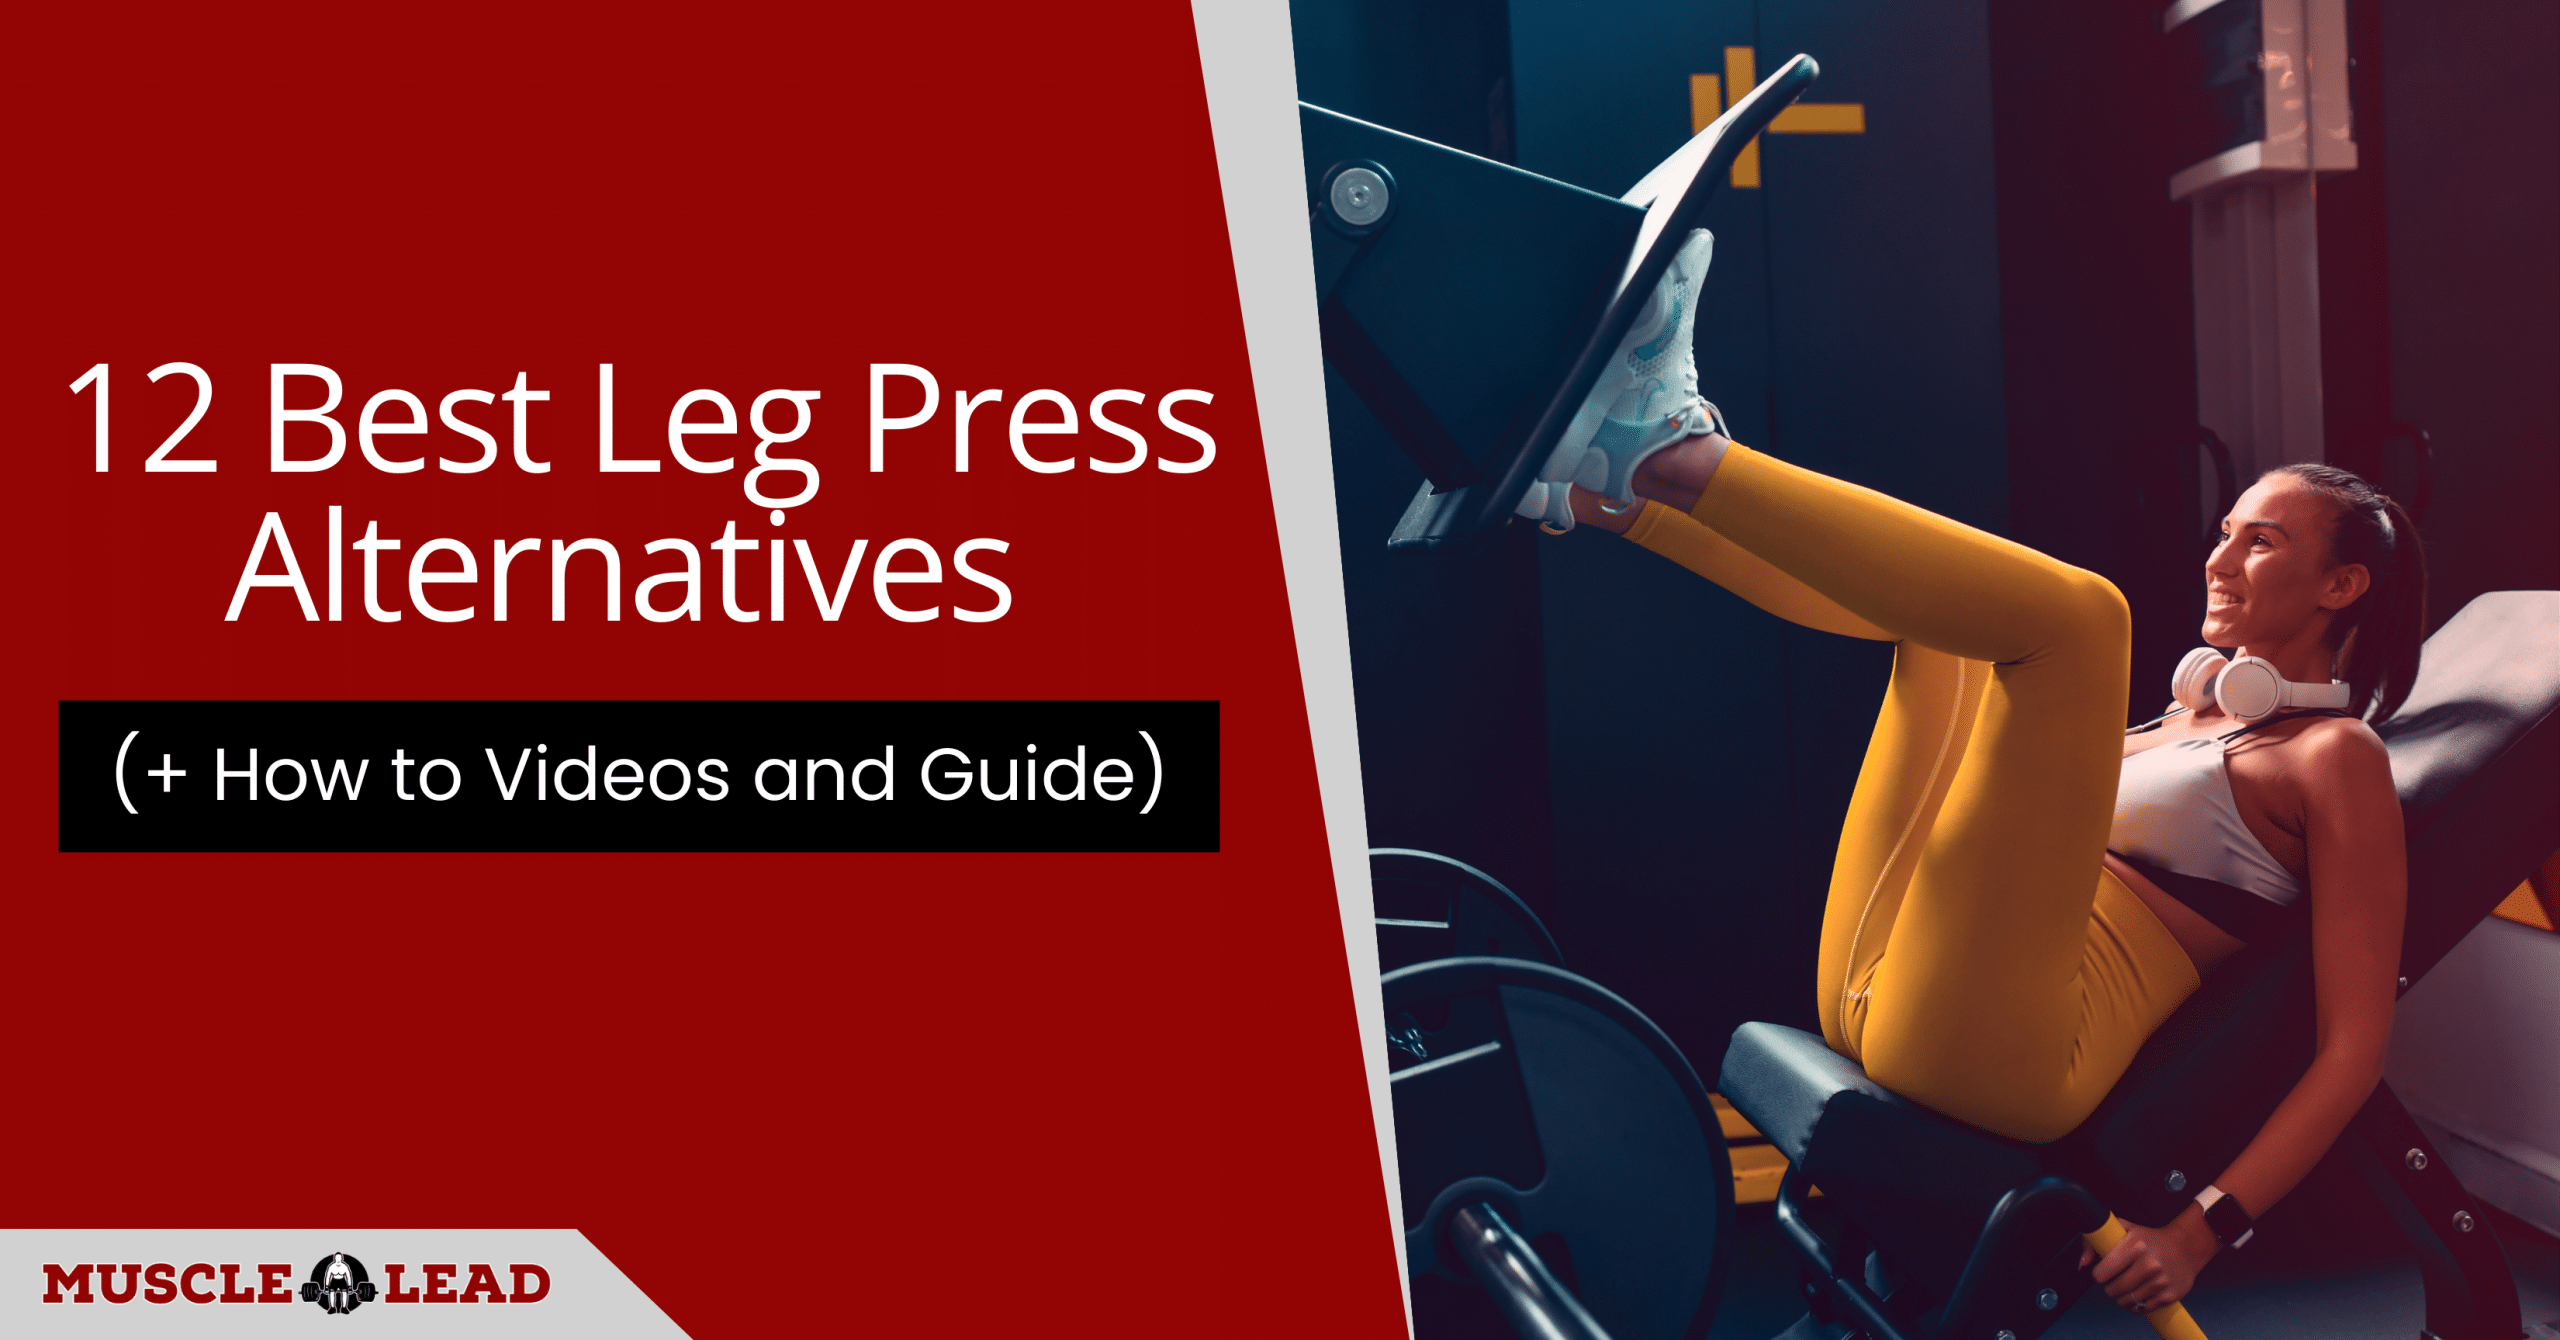 12 Best Leg Press Alternatives (+ How to Videos and Guide)